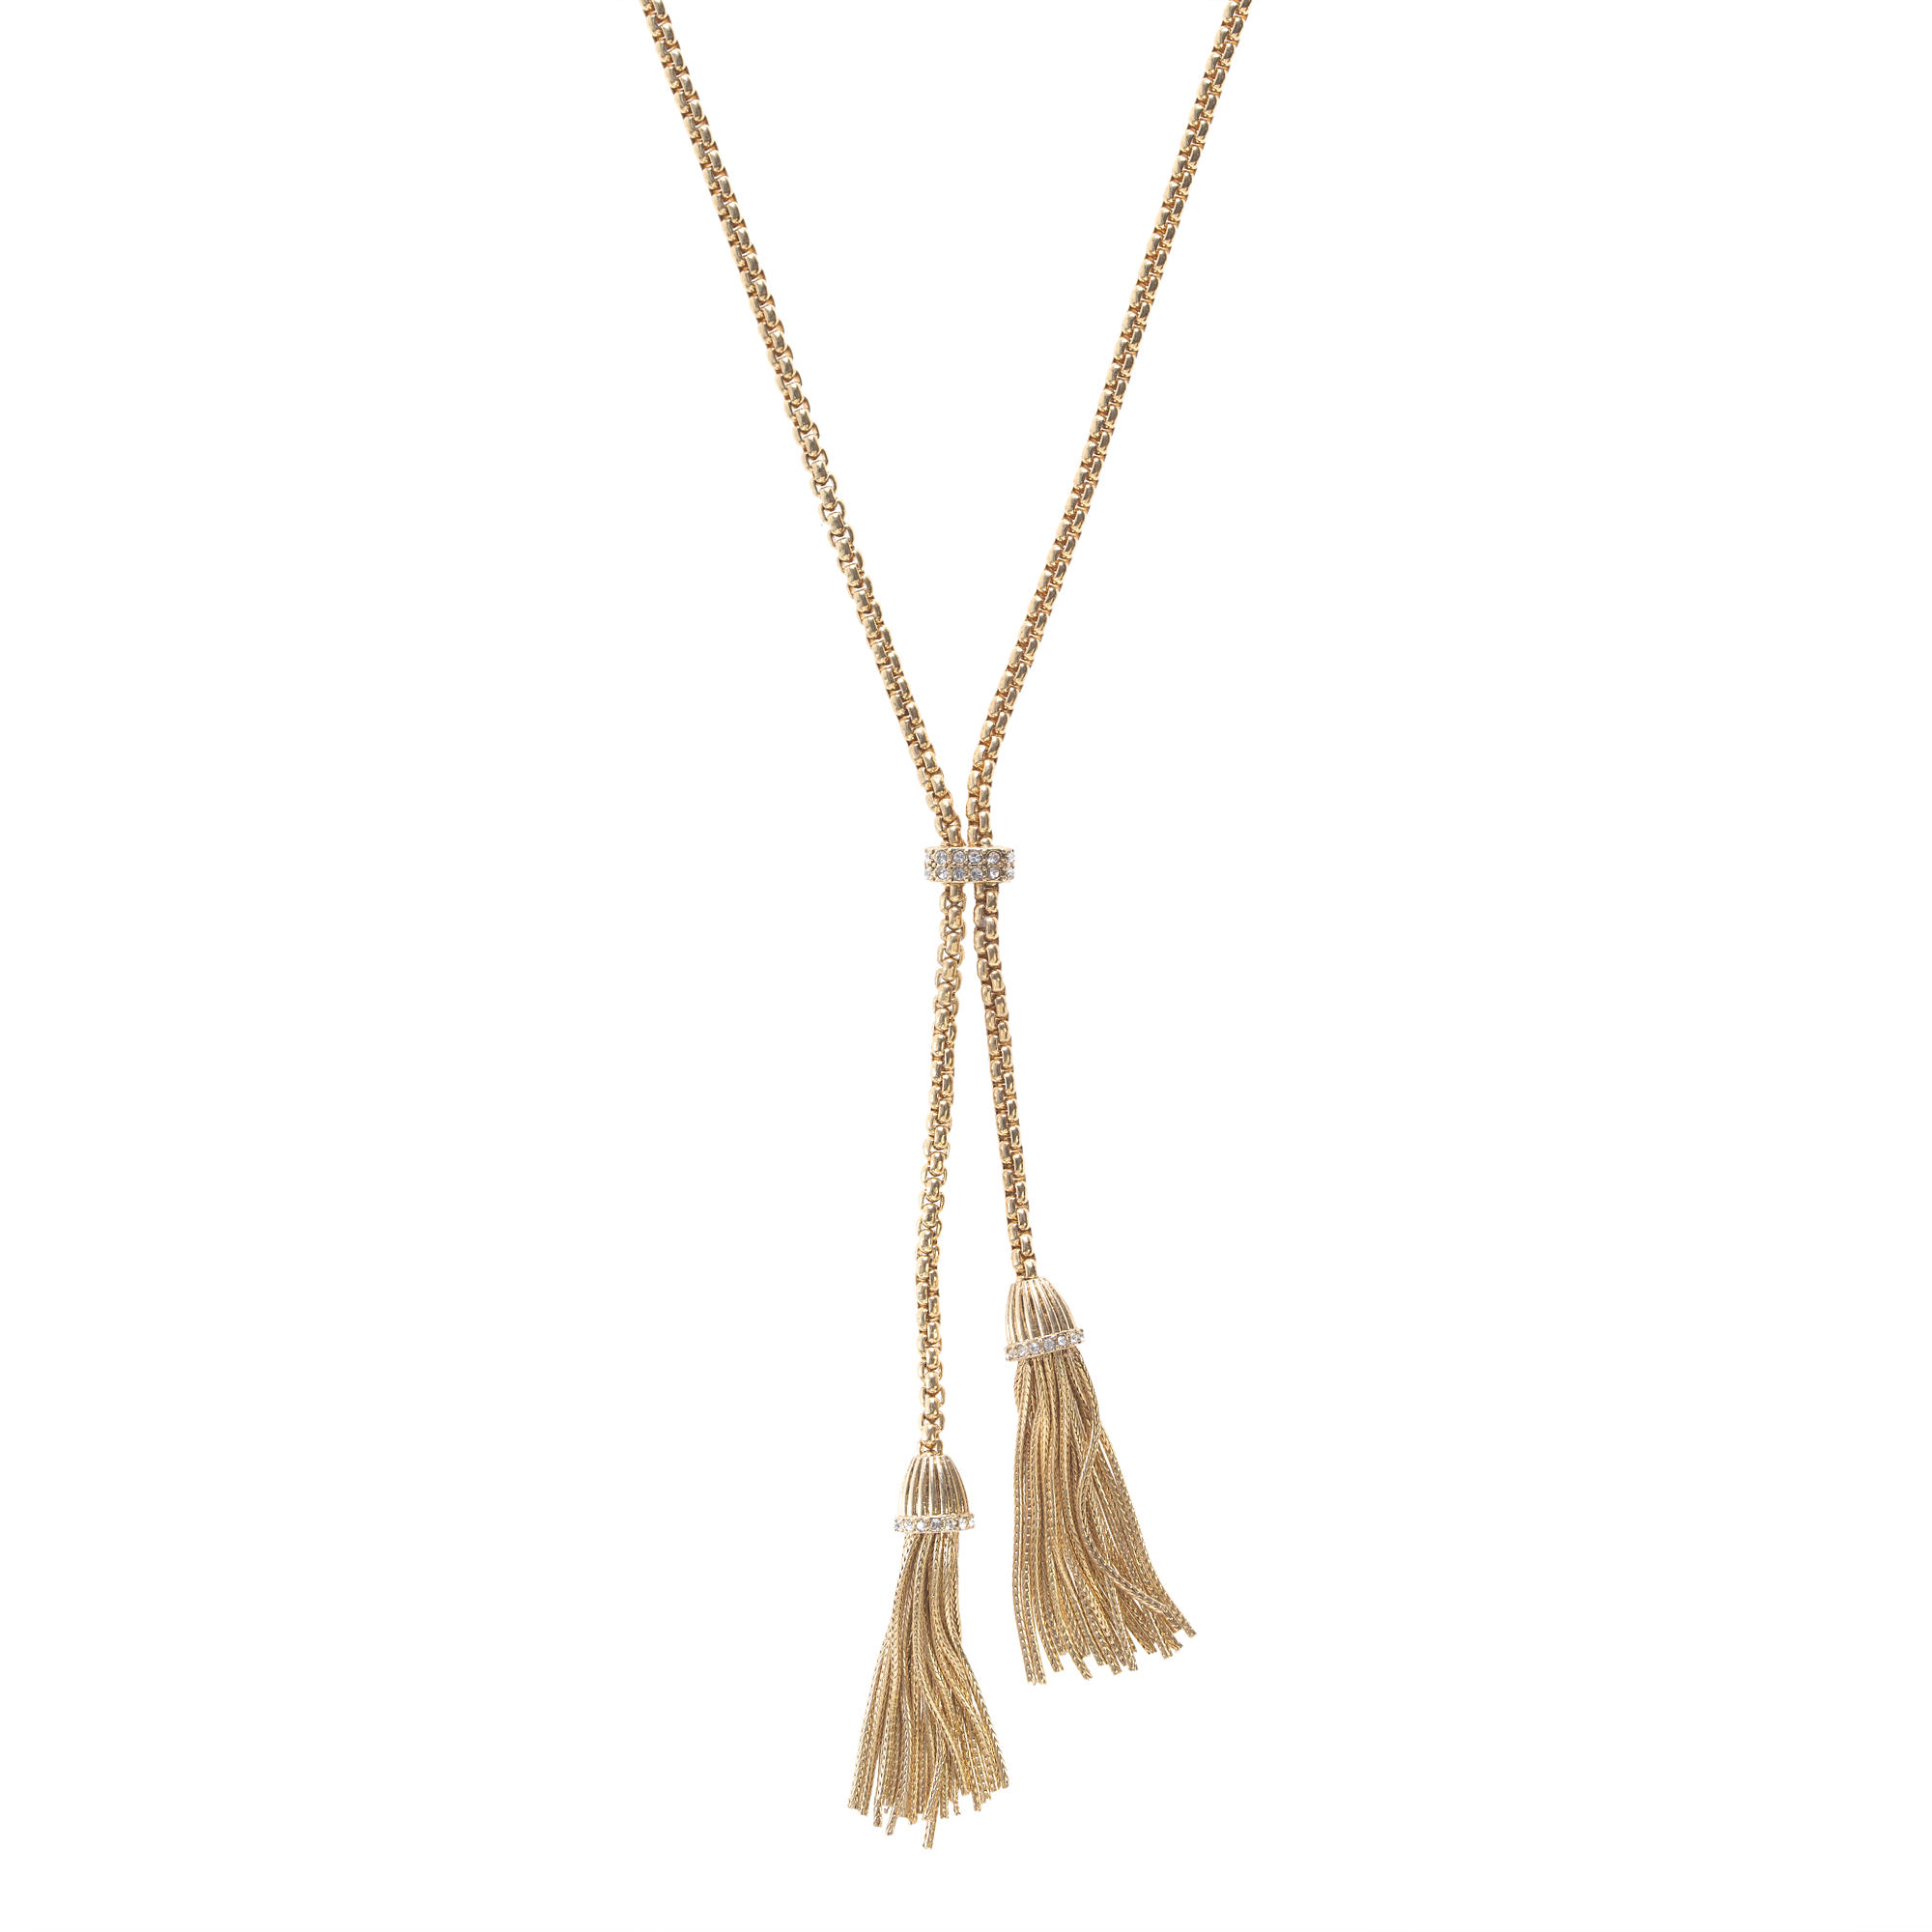 Tassels are Awesome! 20 Jewelry Designs and Tutorials to Inspire ...